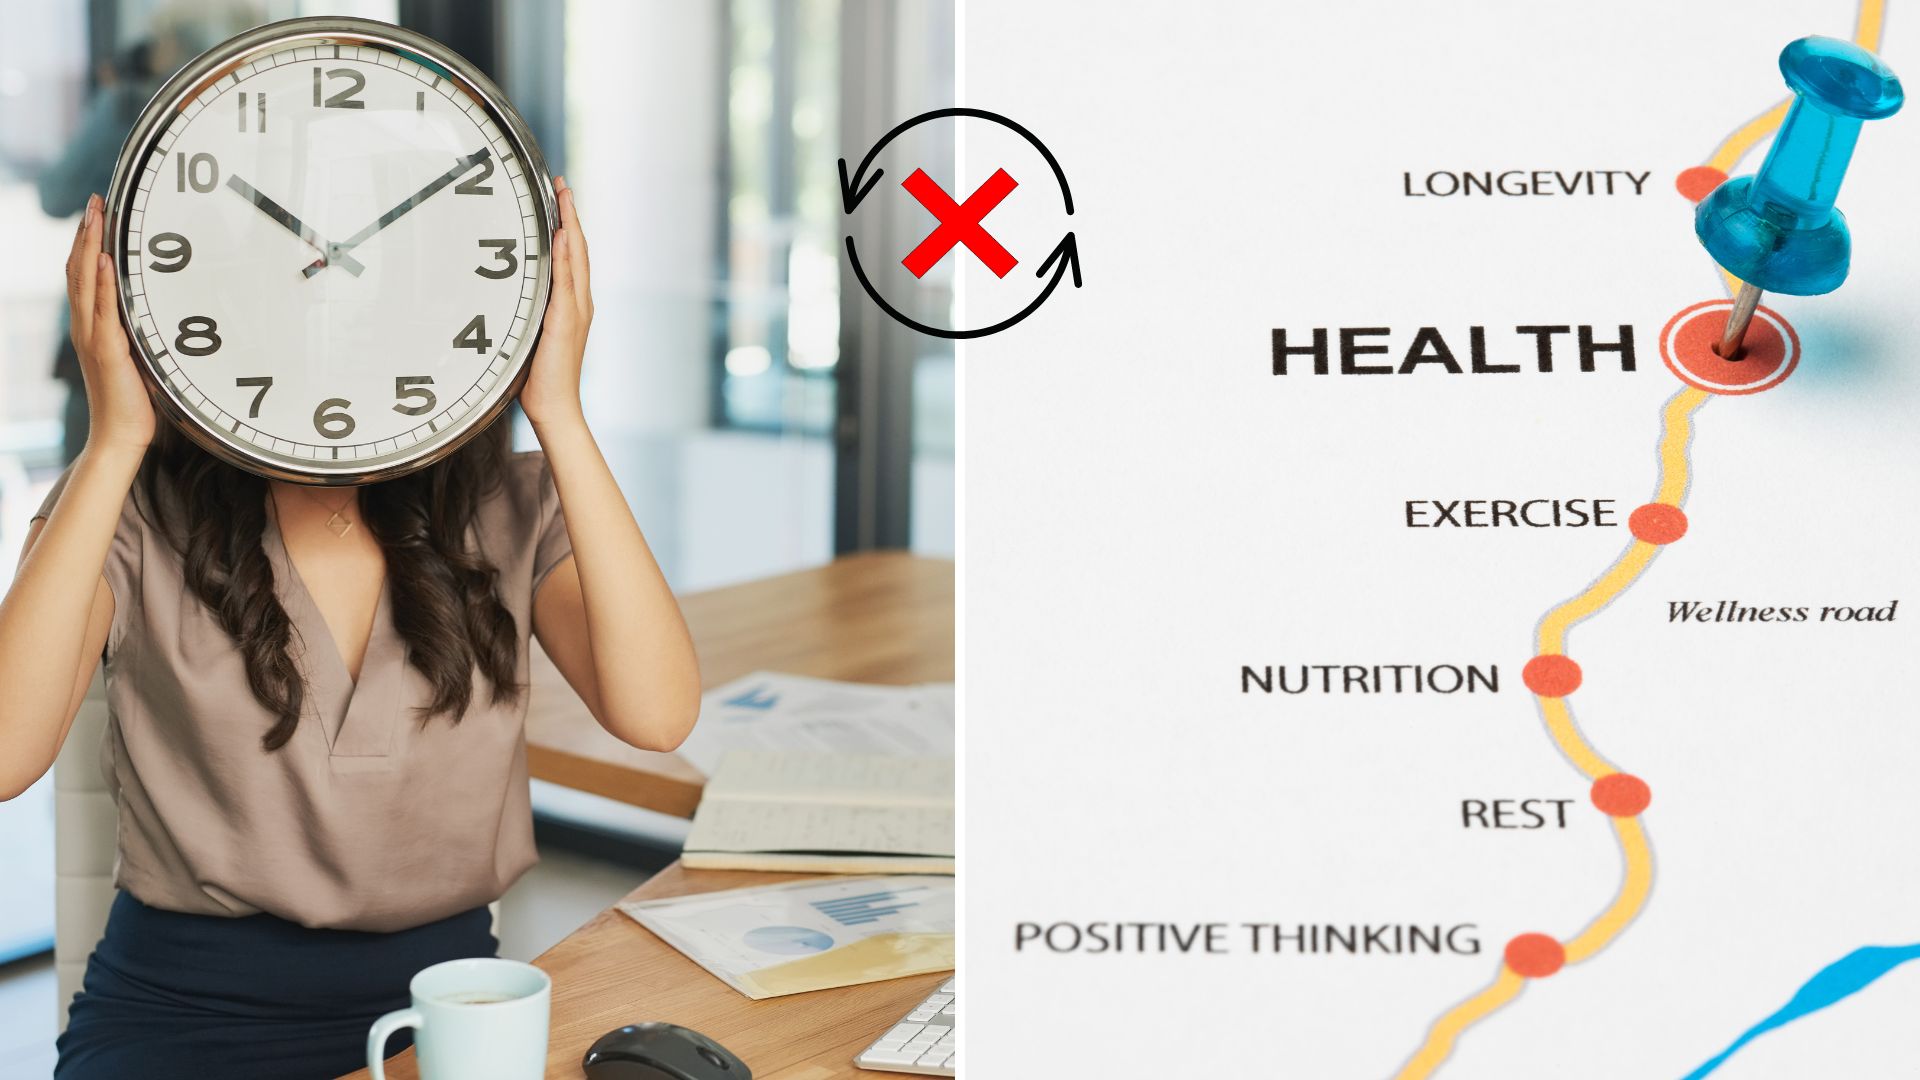 No Time for Your Health Today? No Health for Your Time Tomorrow!